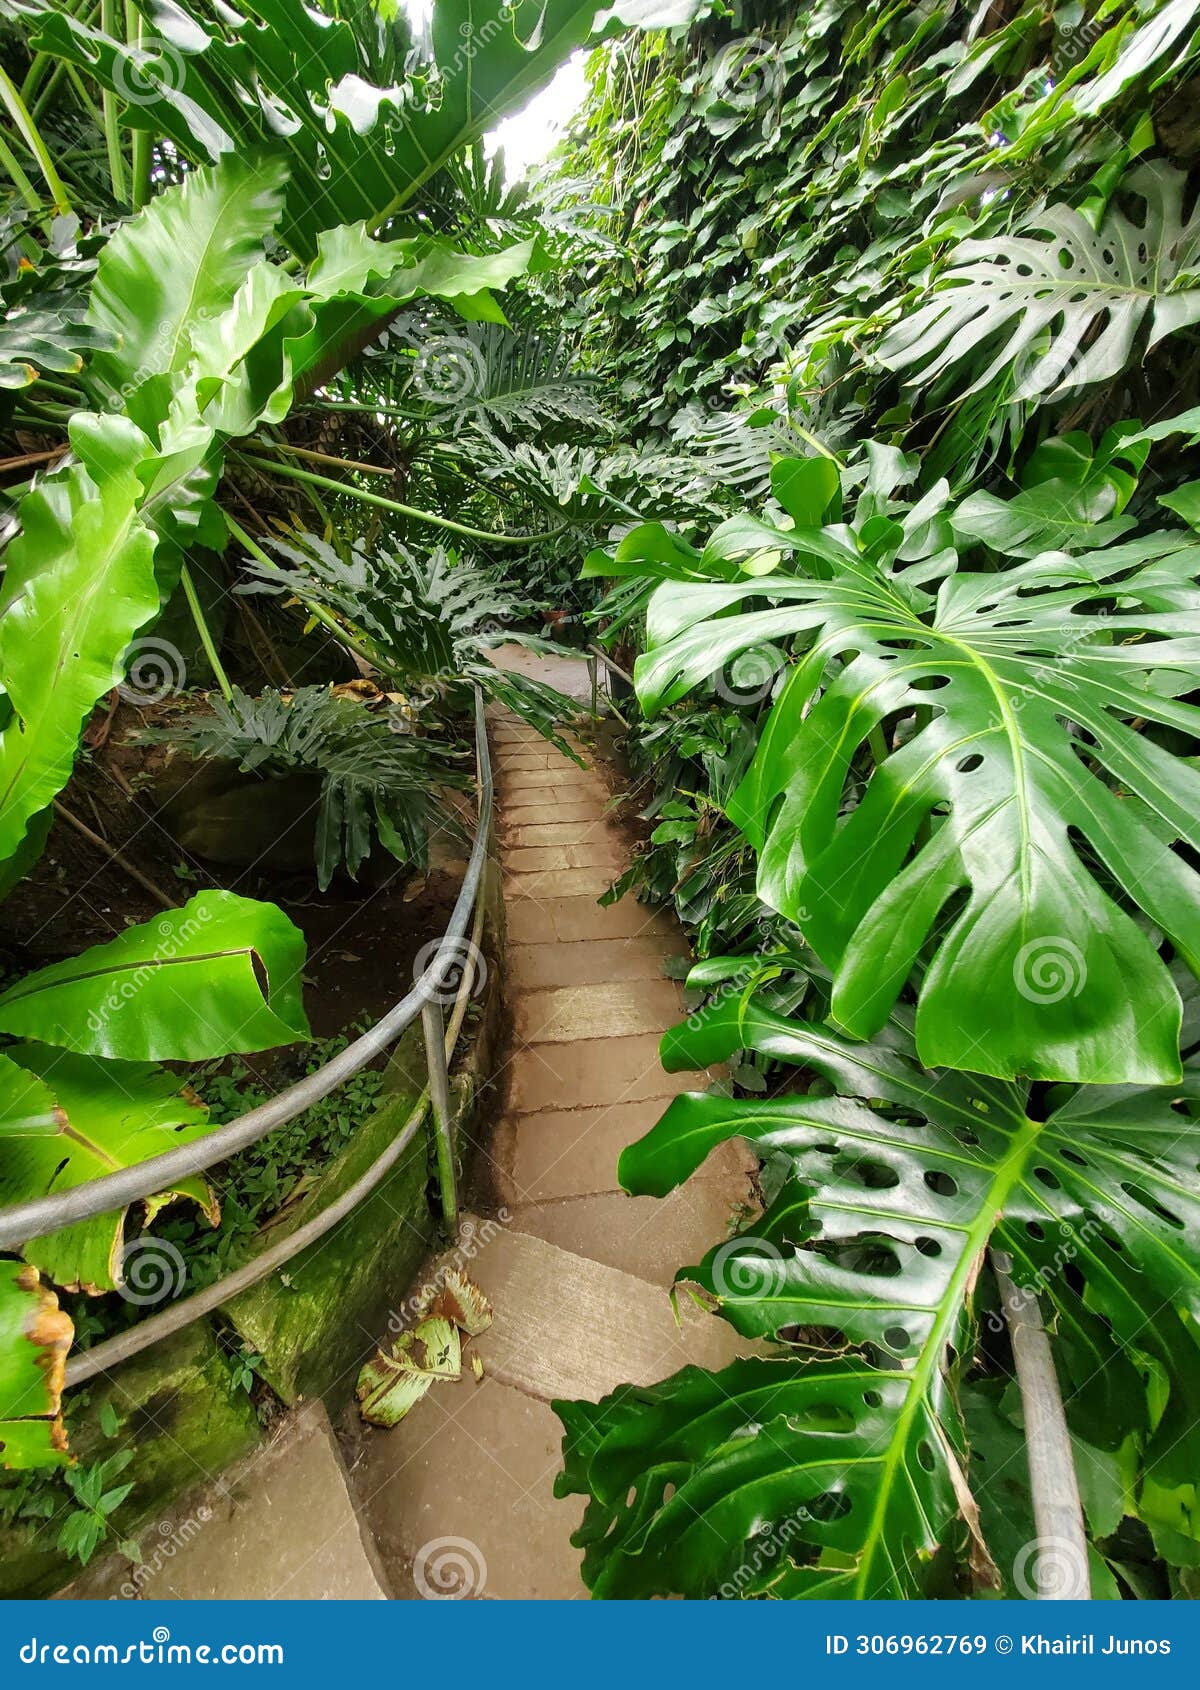 a walking path surrounded by green tropical plants inside of ott's exotics place, schwenksville, pennsylvania